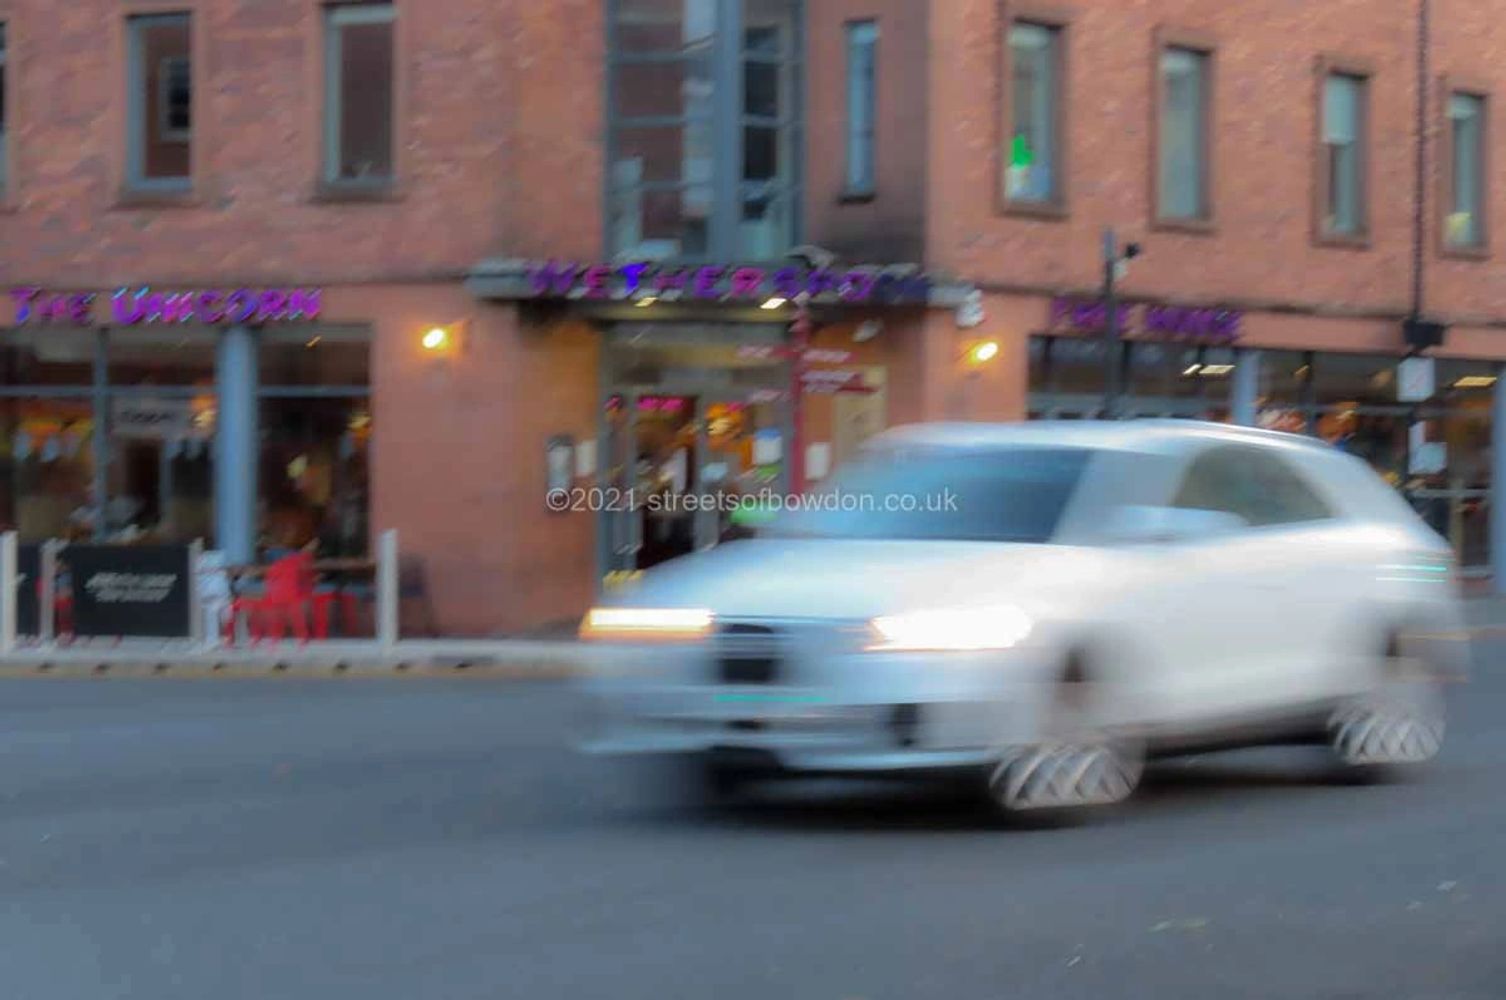 Blurred image of white car in front of pub